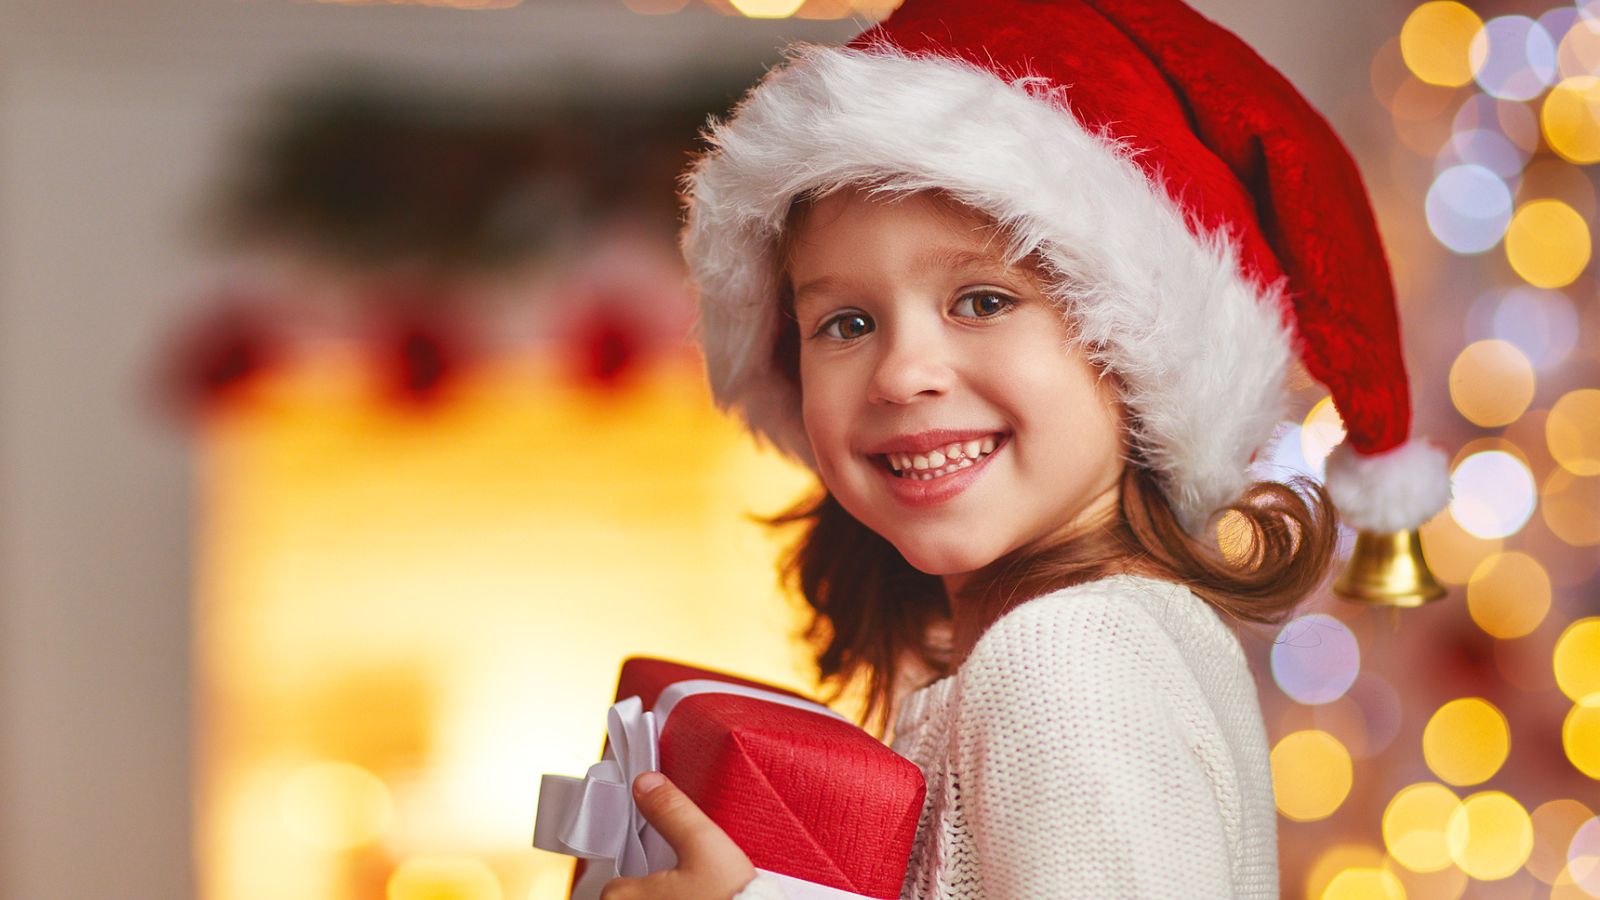 Get creative with the kids preparing homemade gifts